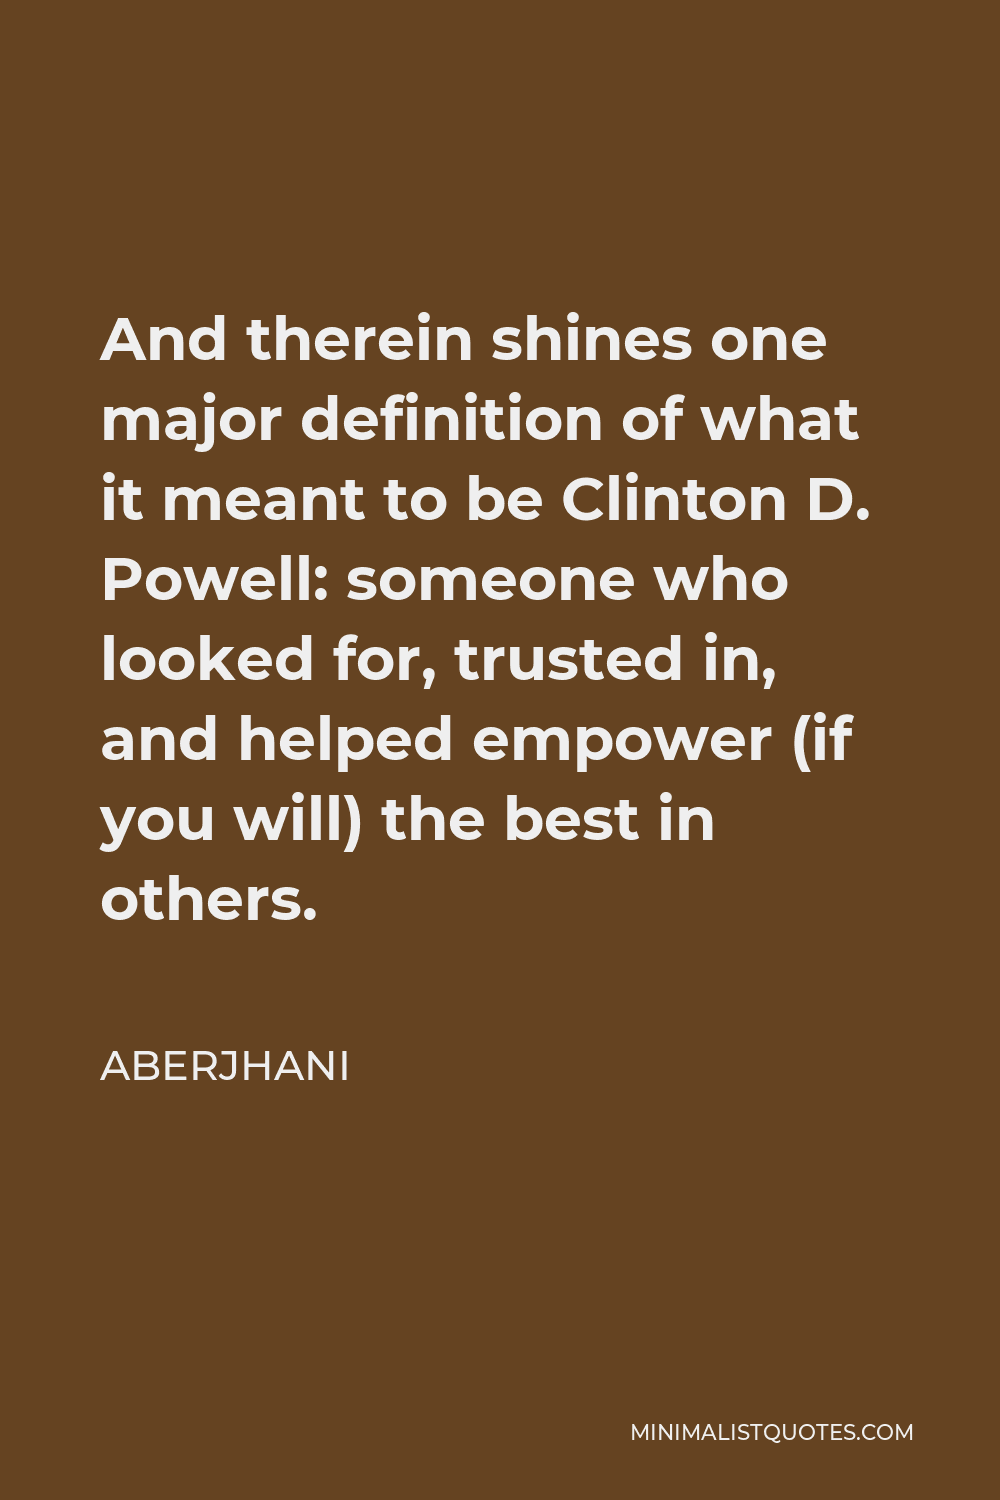 Aberjhani Quote - And therein shines one major definition of what it meant to be Clinton D. Powell: someone who looked for, trusted in, and helped empower (if you will) the best in others.